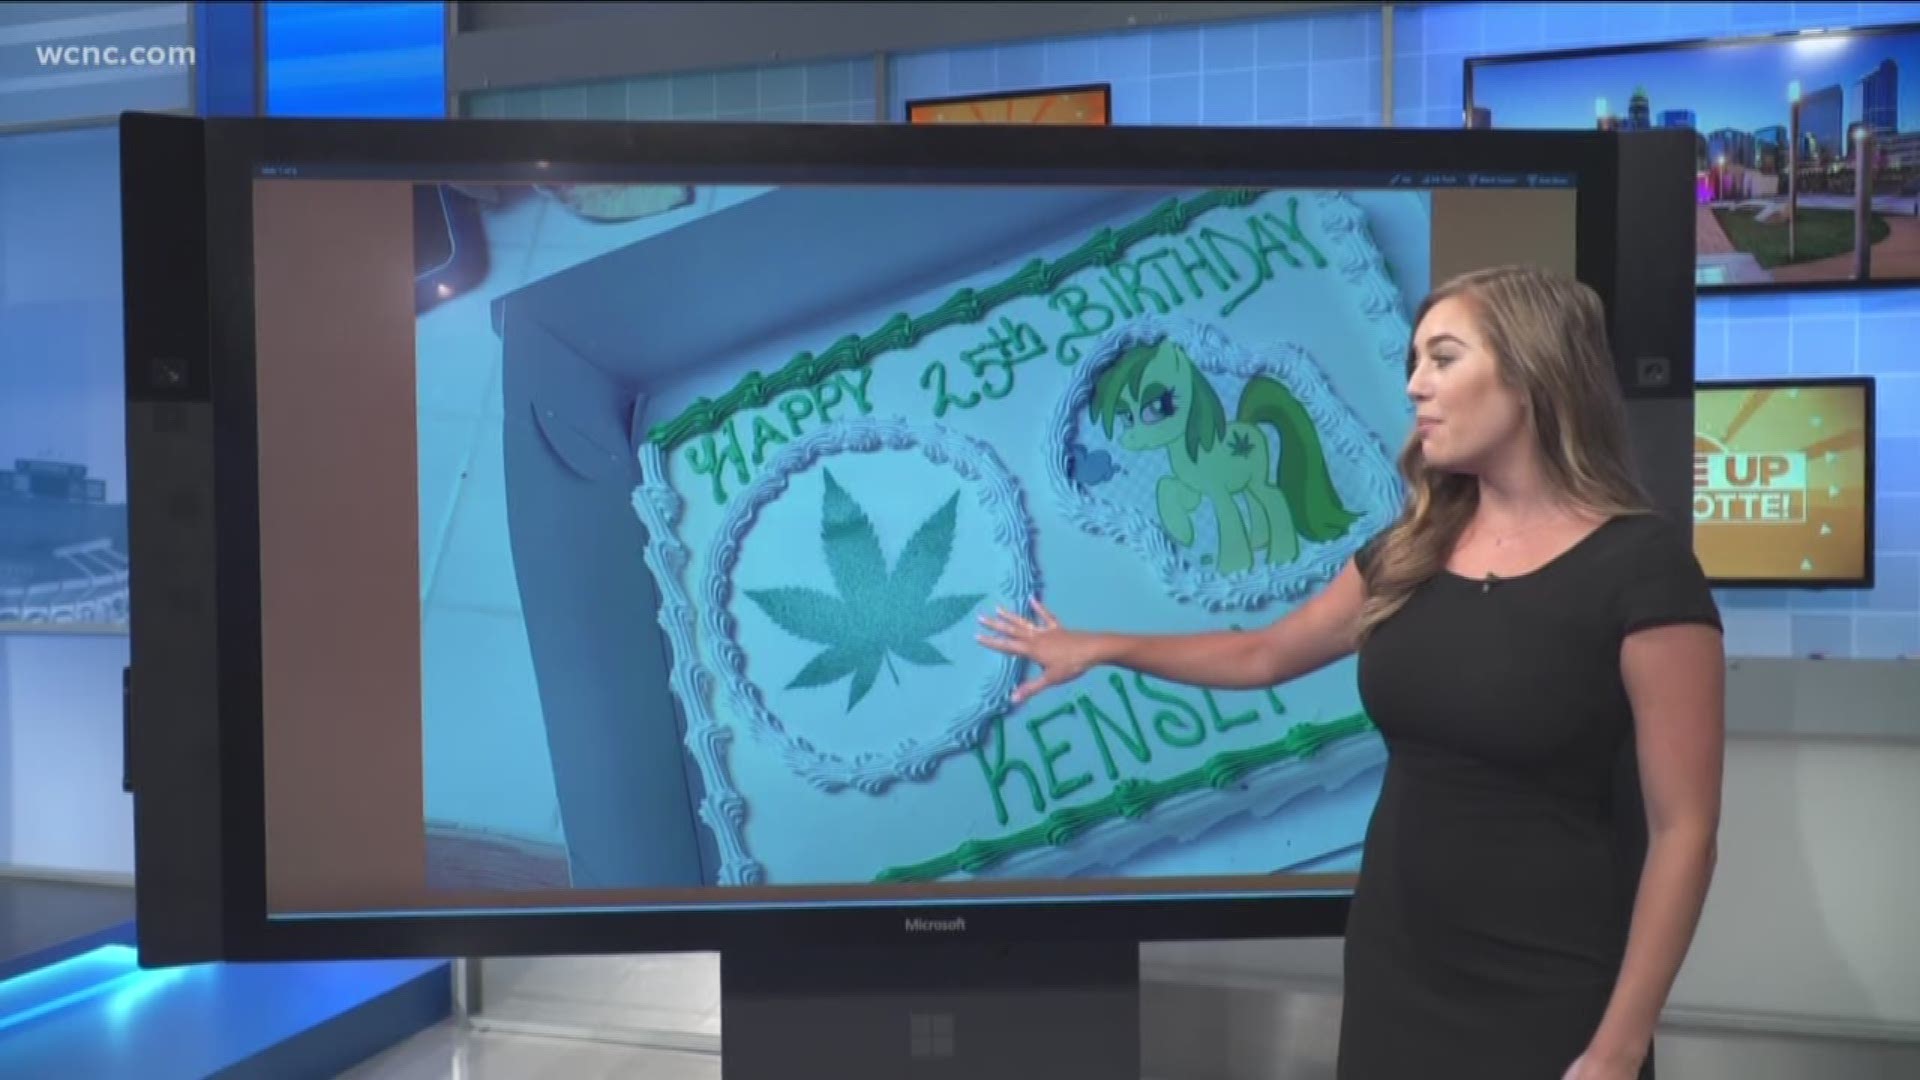 A cake decorator at a Dairy Queen in Georgia was fired after she mistakenly designed a cake with a marijuana theme after a customer requested the Disney character "Moana." Social media reaction has been quick to defend the worker, saying it was a simple misunderstanding.